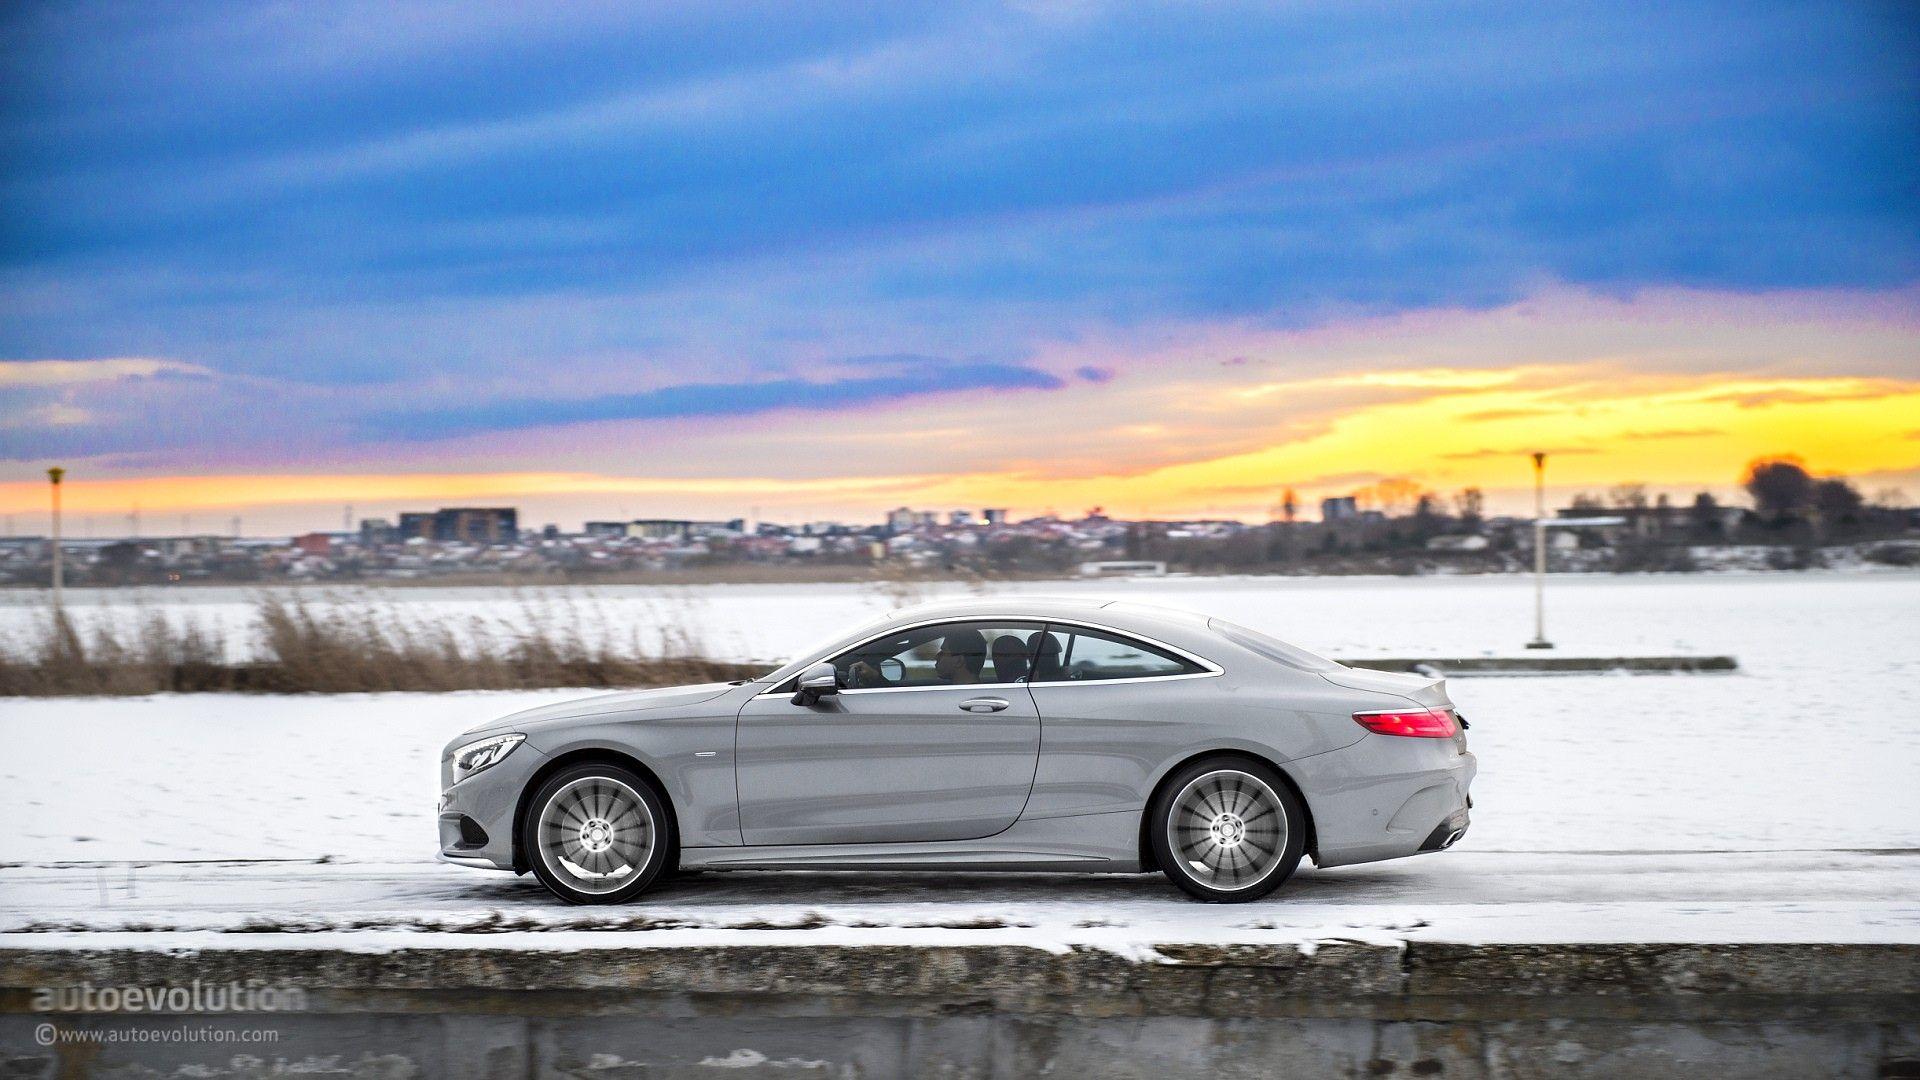 Mercedes Benz S Class Coupe HD Wallpaper: If Rodin Was A